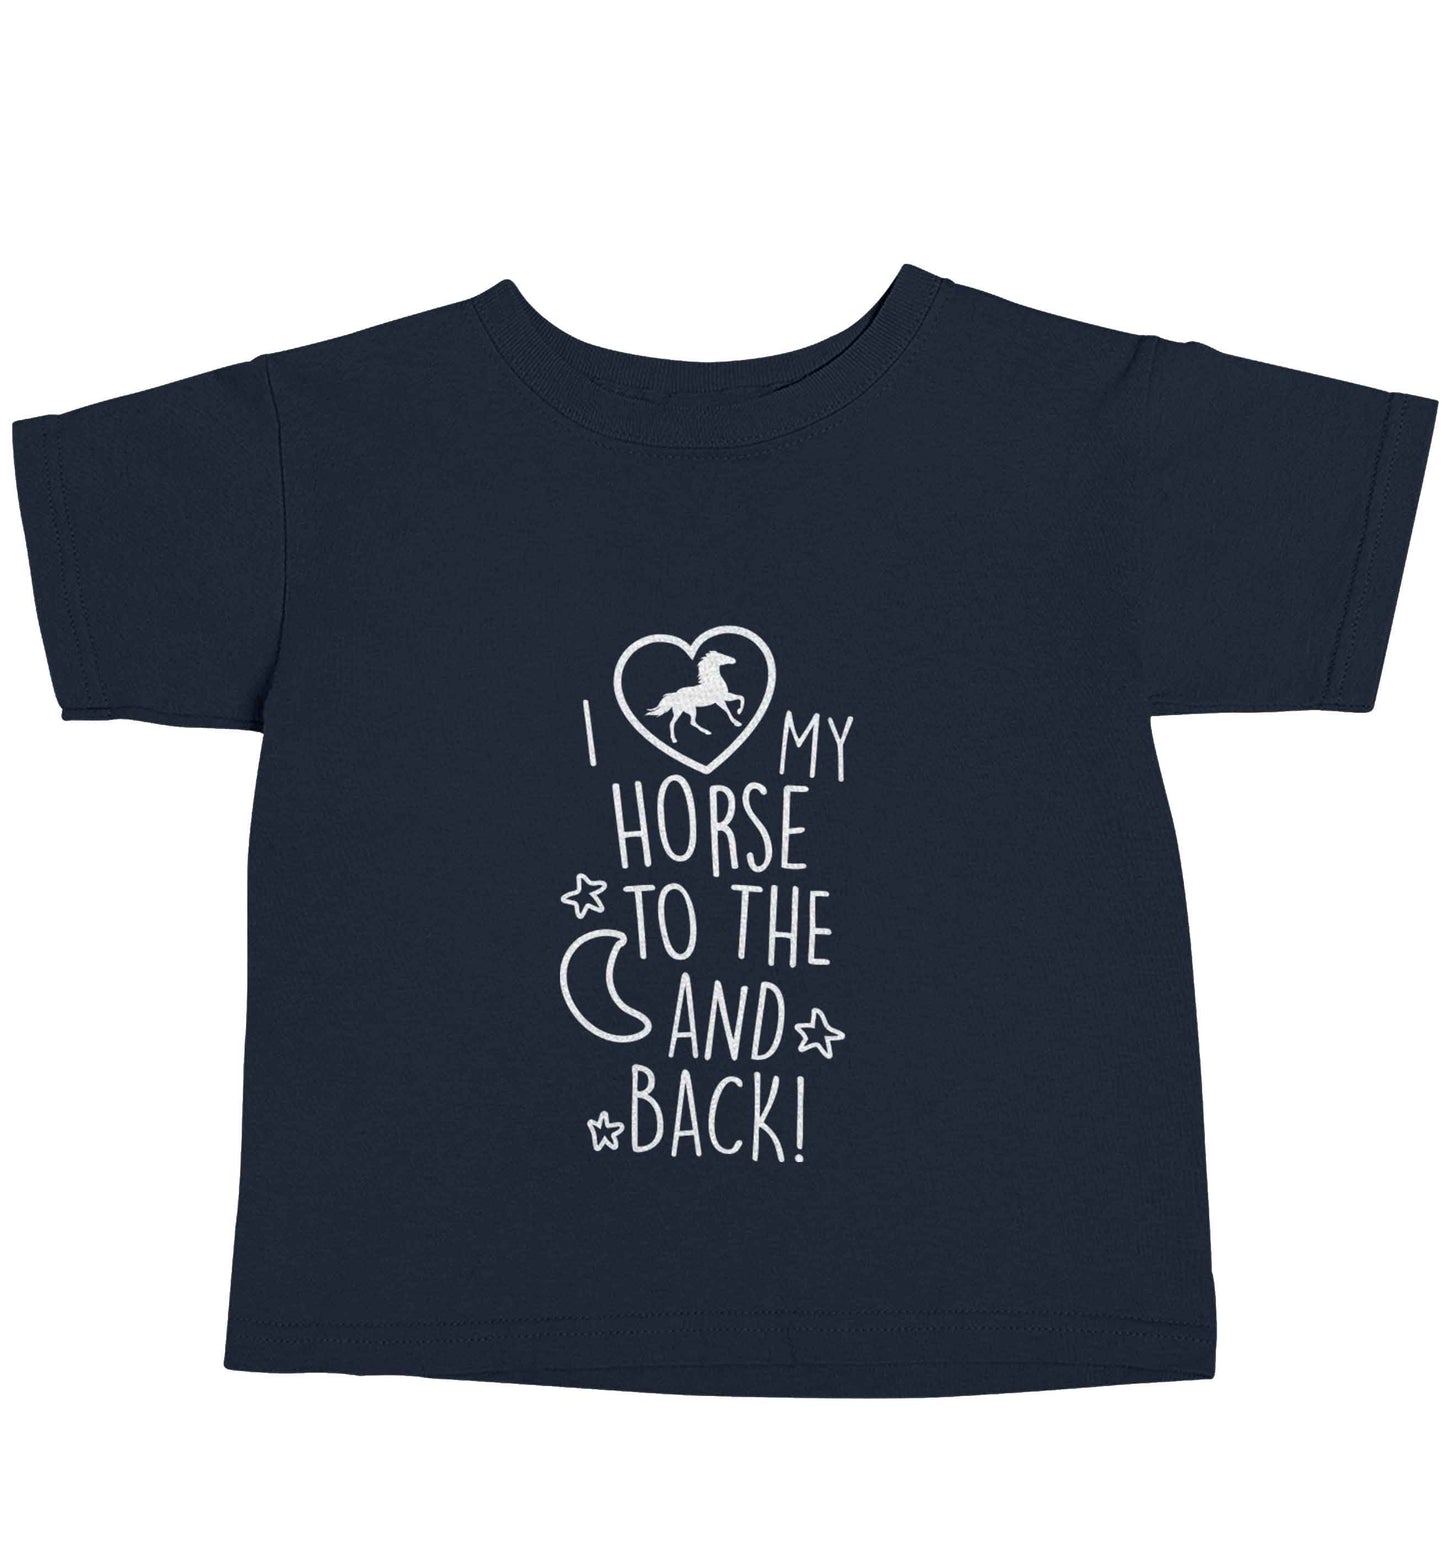 I love my horse to the moon and back navy baby toddler Tshirt 2 Years